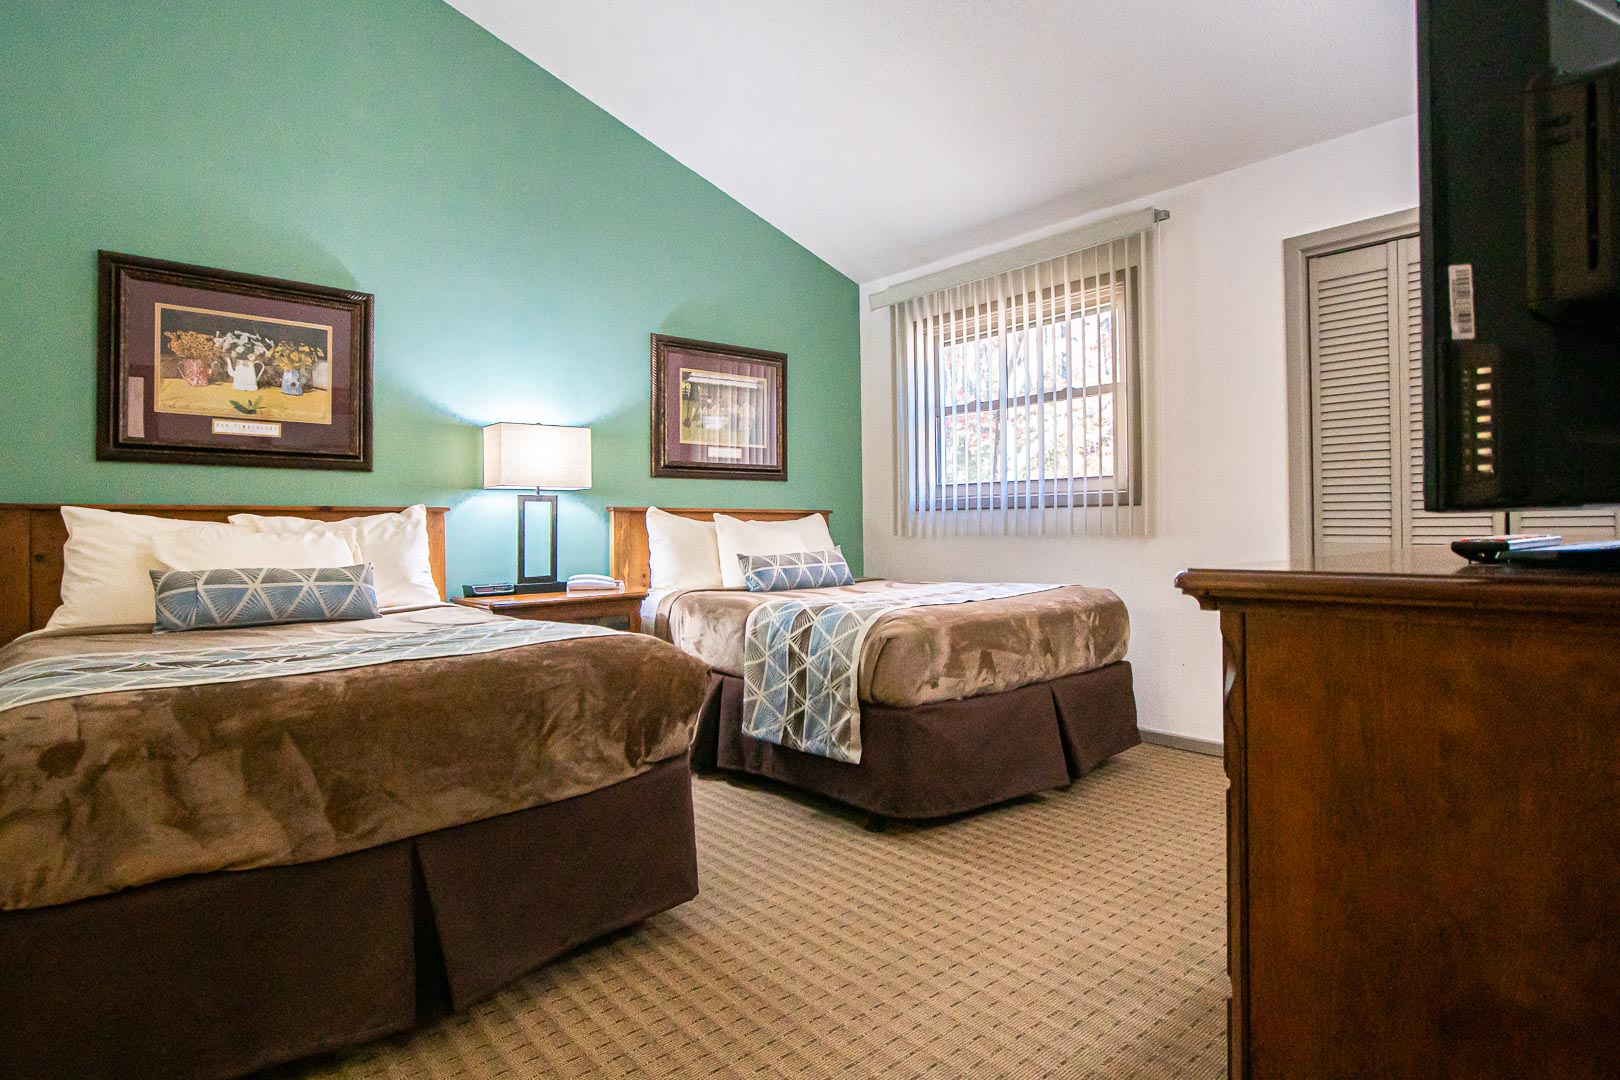 A spacious bedroom with double beds at VRI's Fox Run Resort in North Carolina.